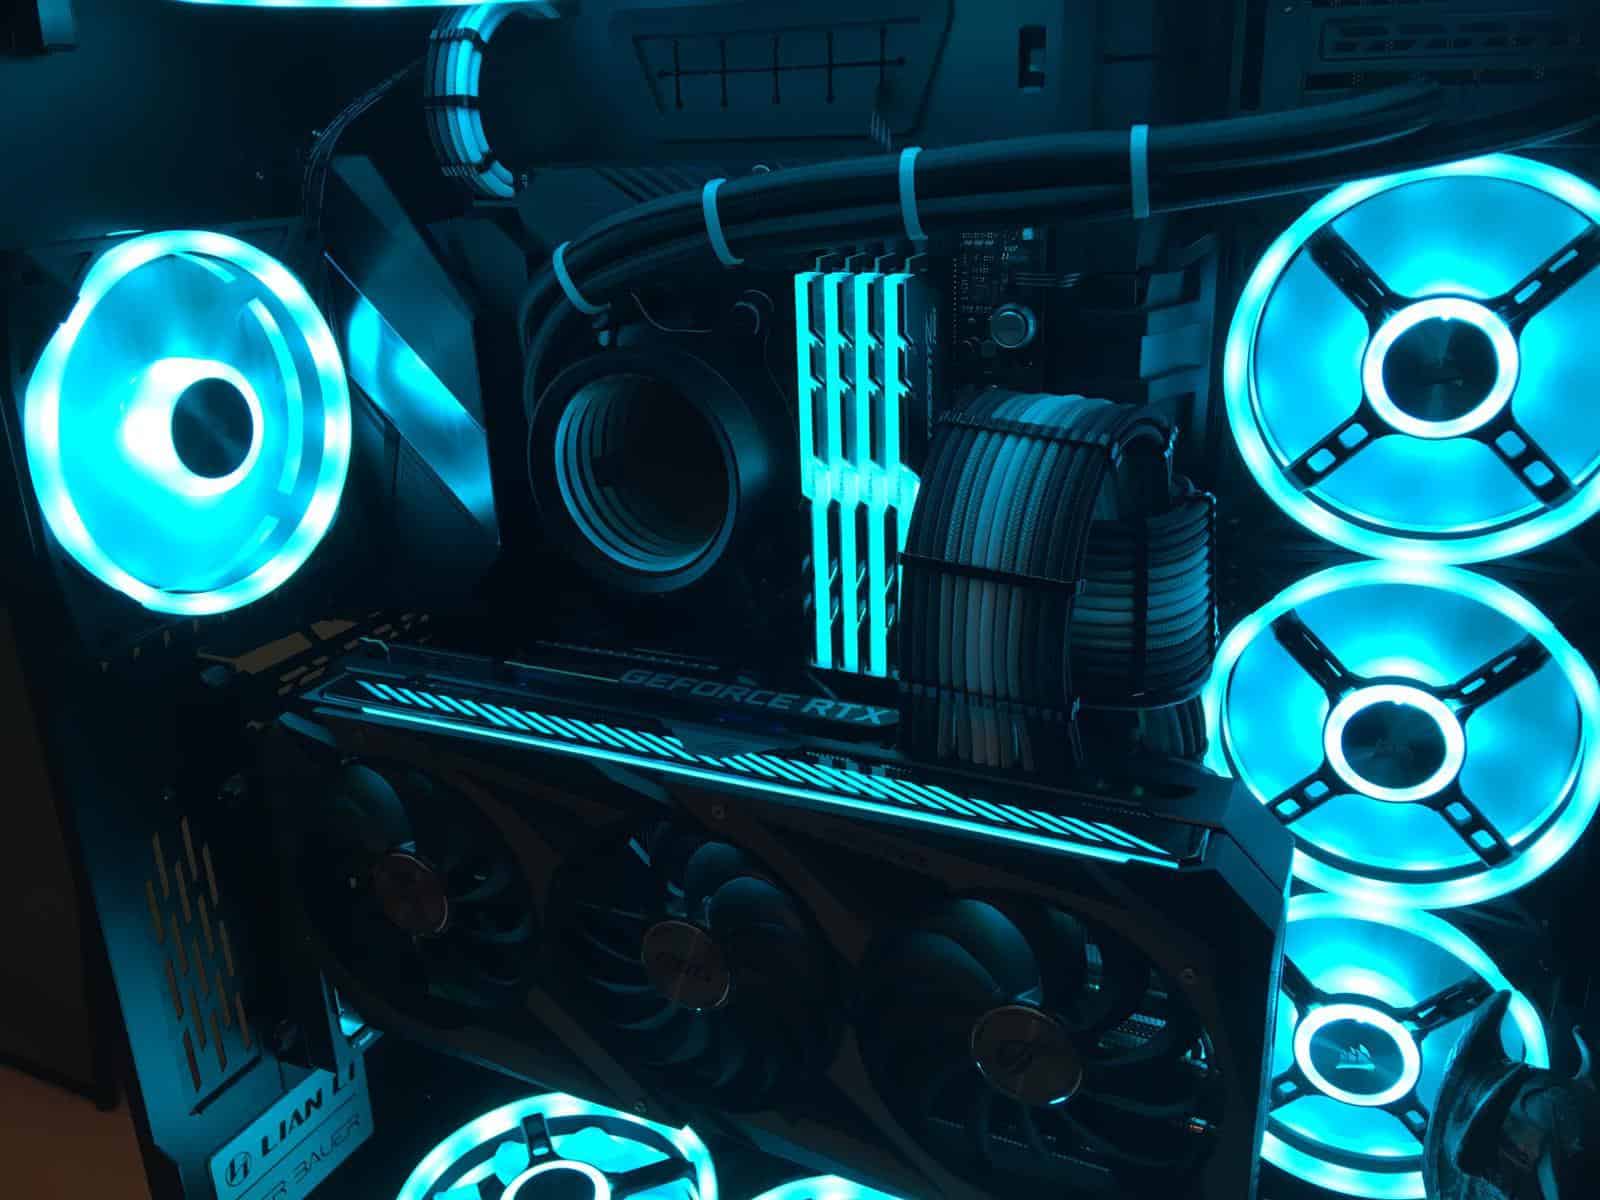 100+] Gaming Setup Pictures | Wallpapers.com